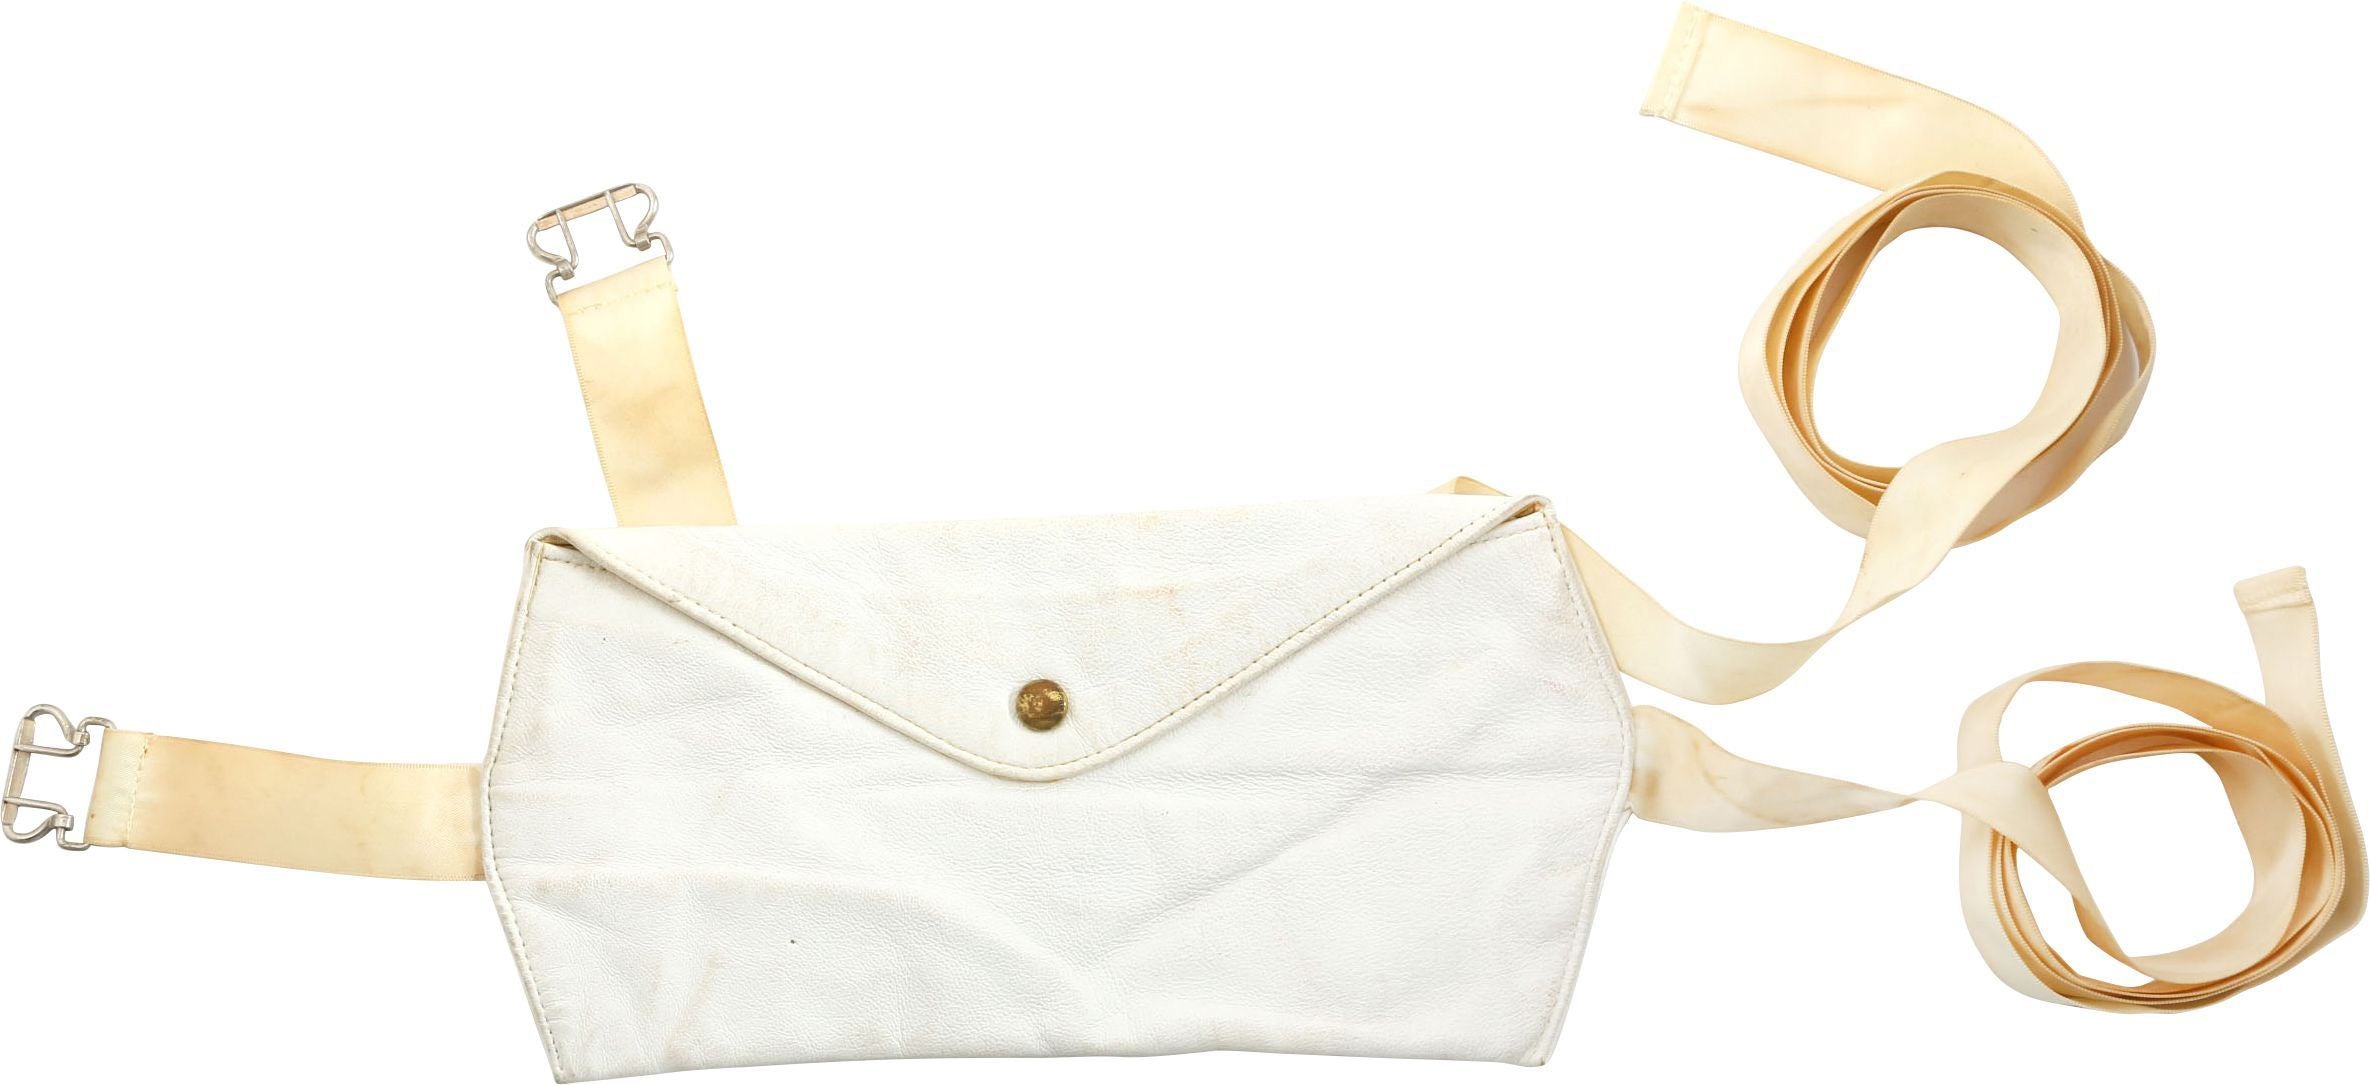 LADIES CONCEALED MONEY POUCH – Fagan Arms